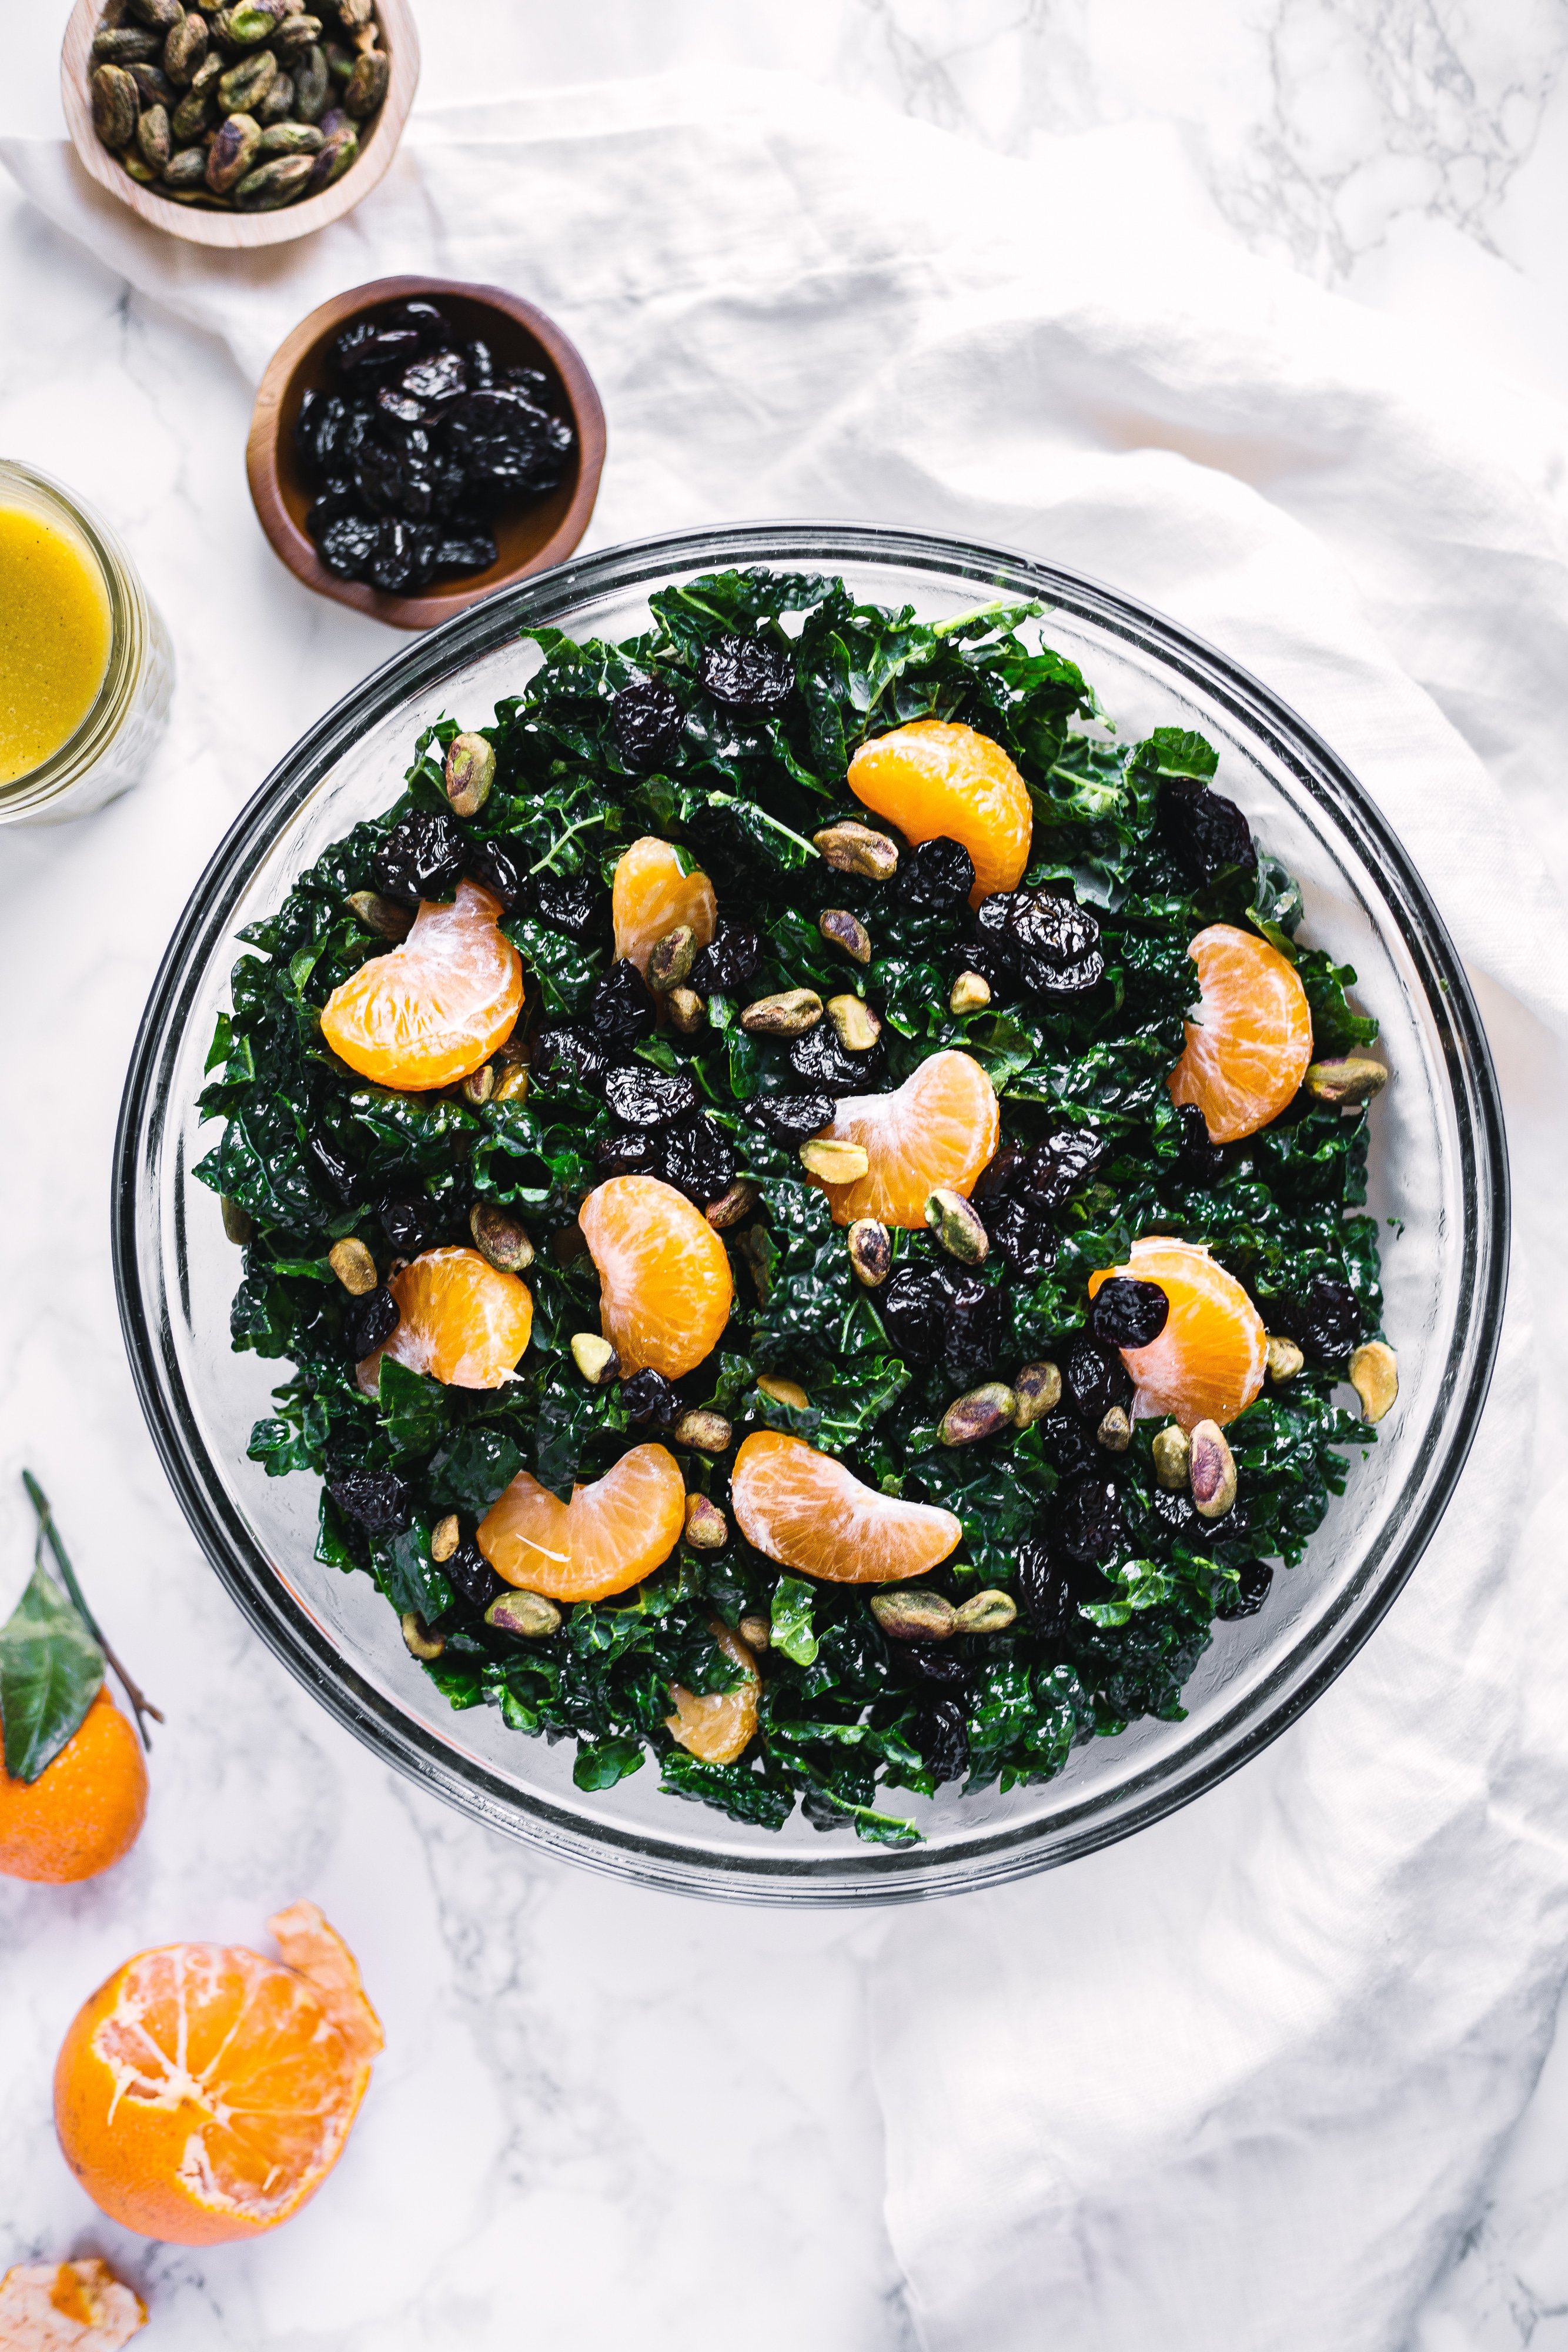 Kale Salad with oranges, pistachios and cherries